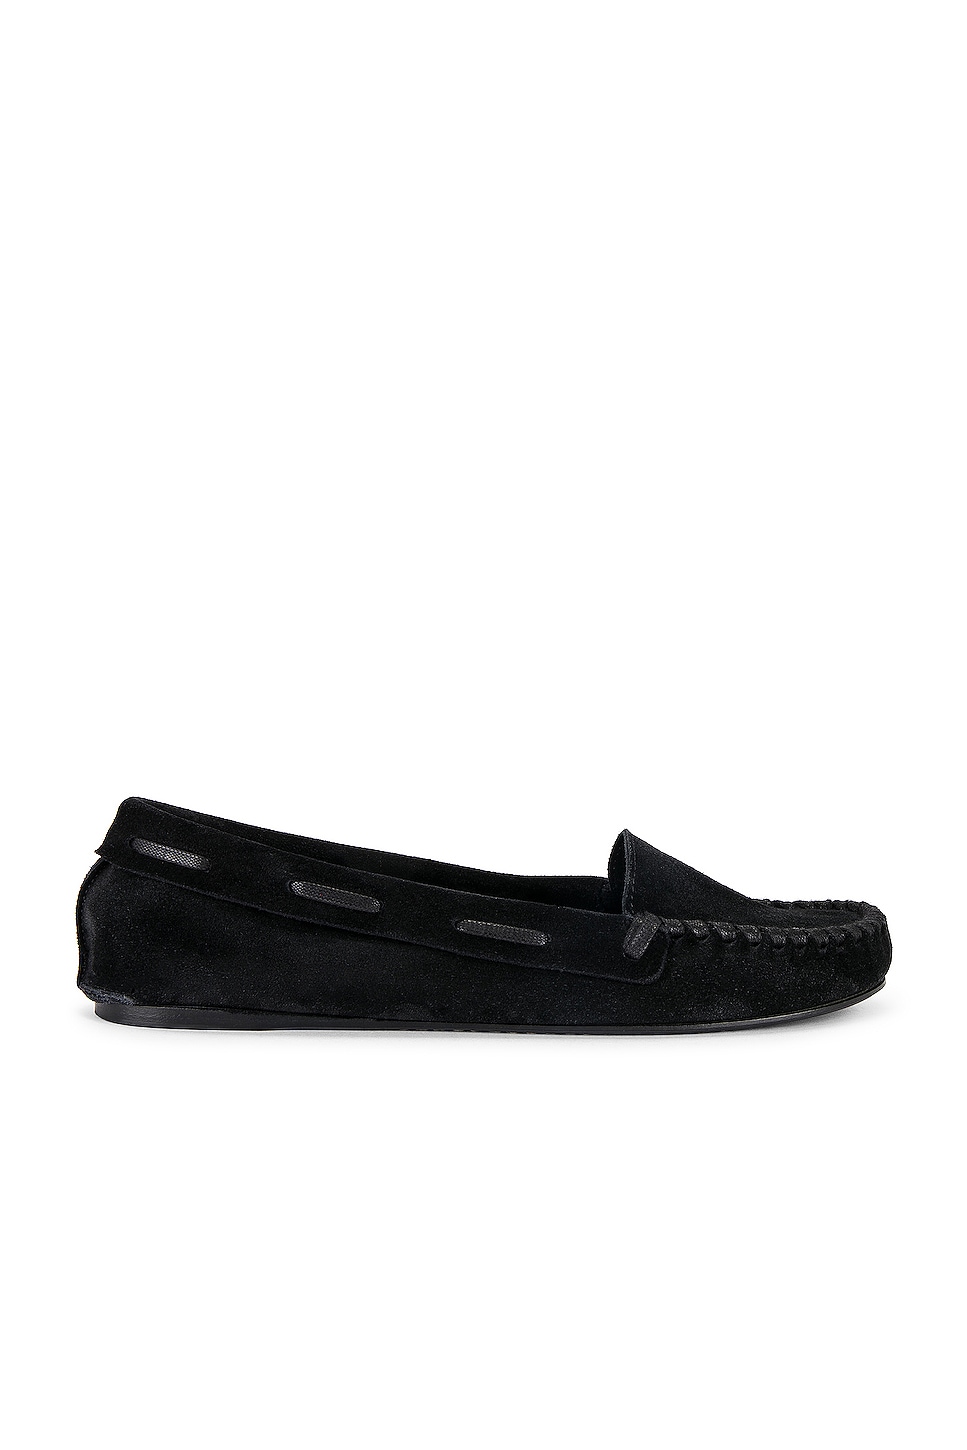 Image 1 of The Row Mabel Moc Loafer in Black